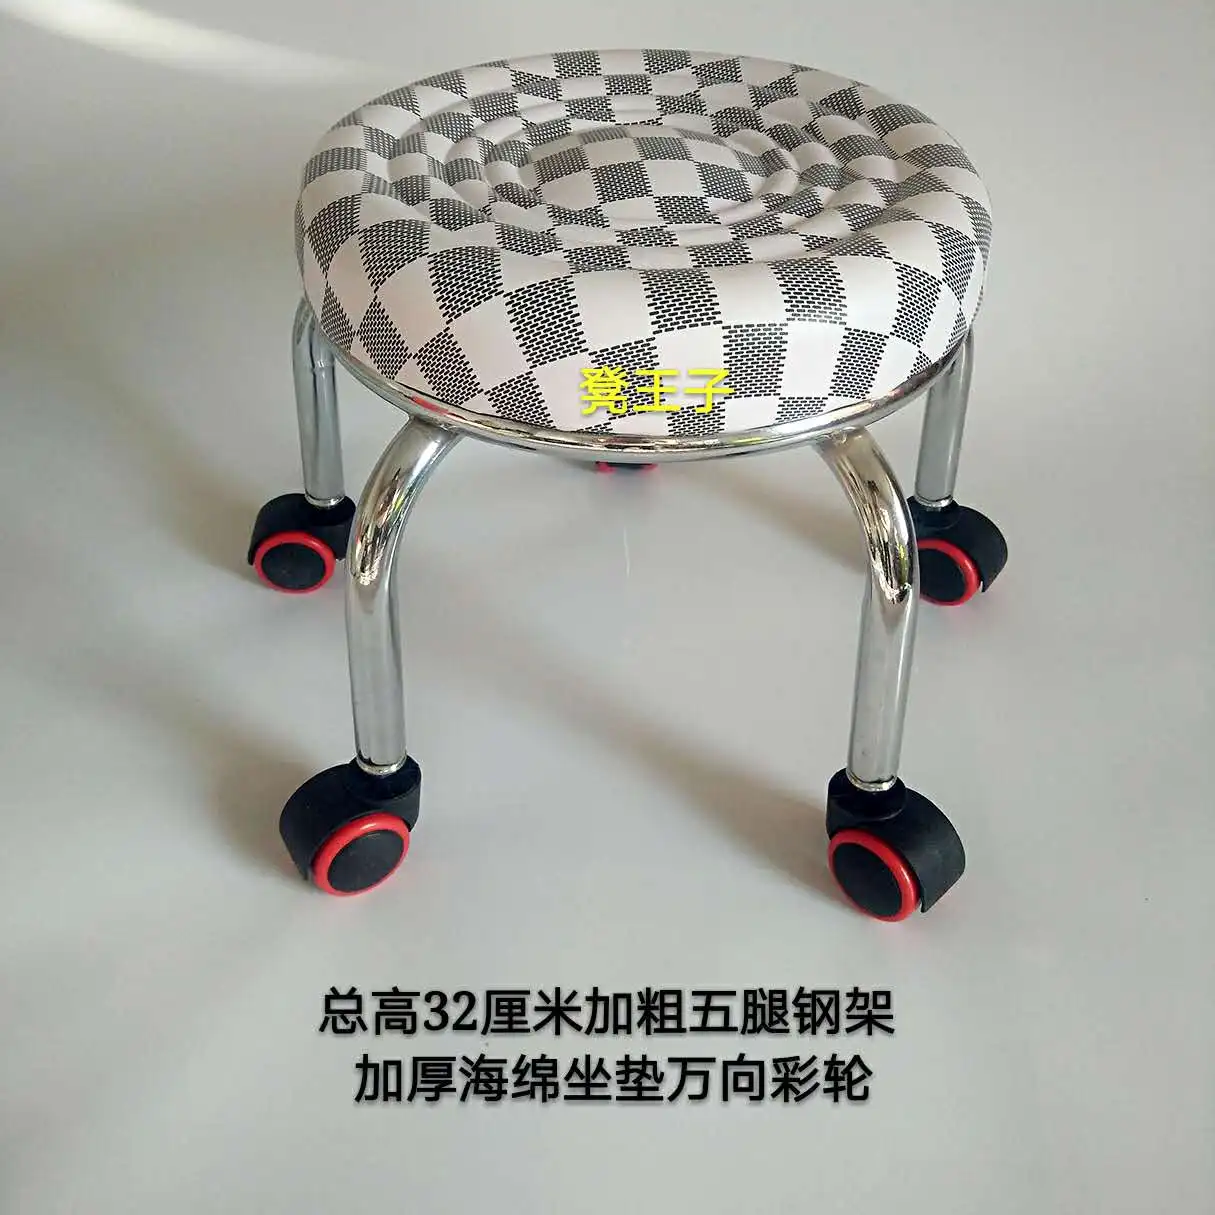 Pulley Stool Beauty Sewing Construction Stool Round Bench Stool with Doll Stool Child Toddler Stool Pulley Stool Squat Stool